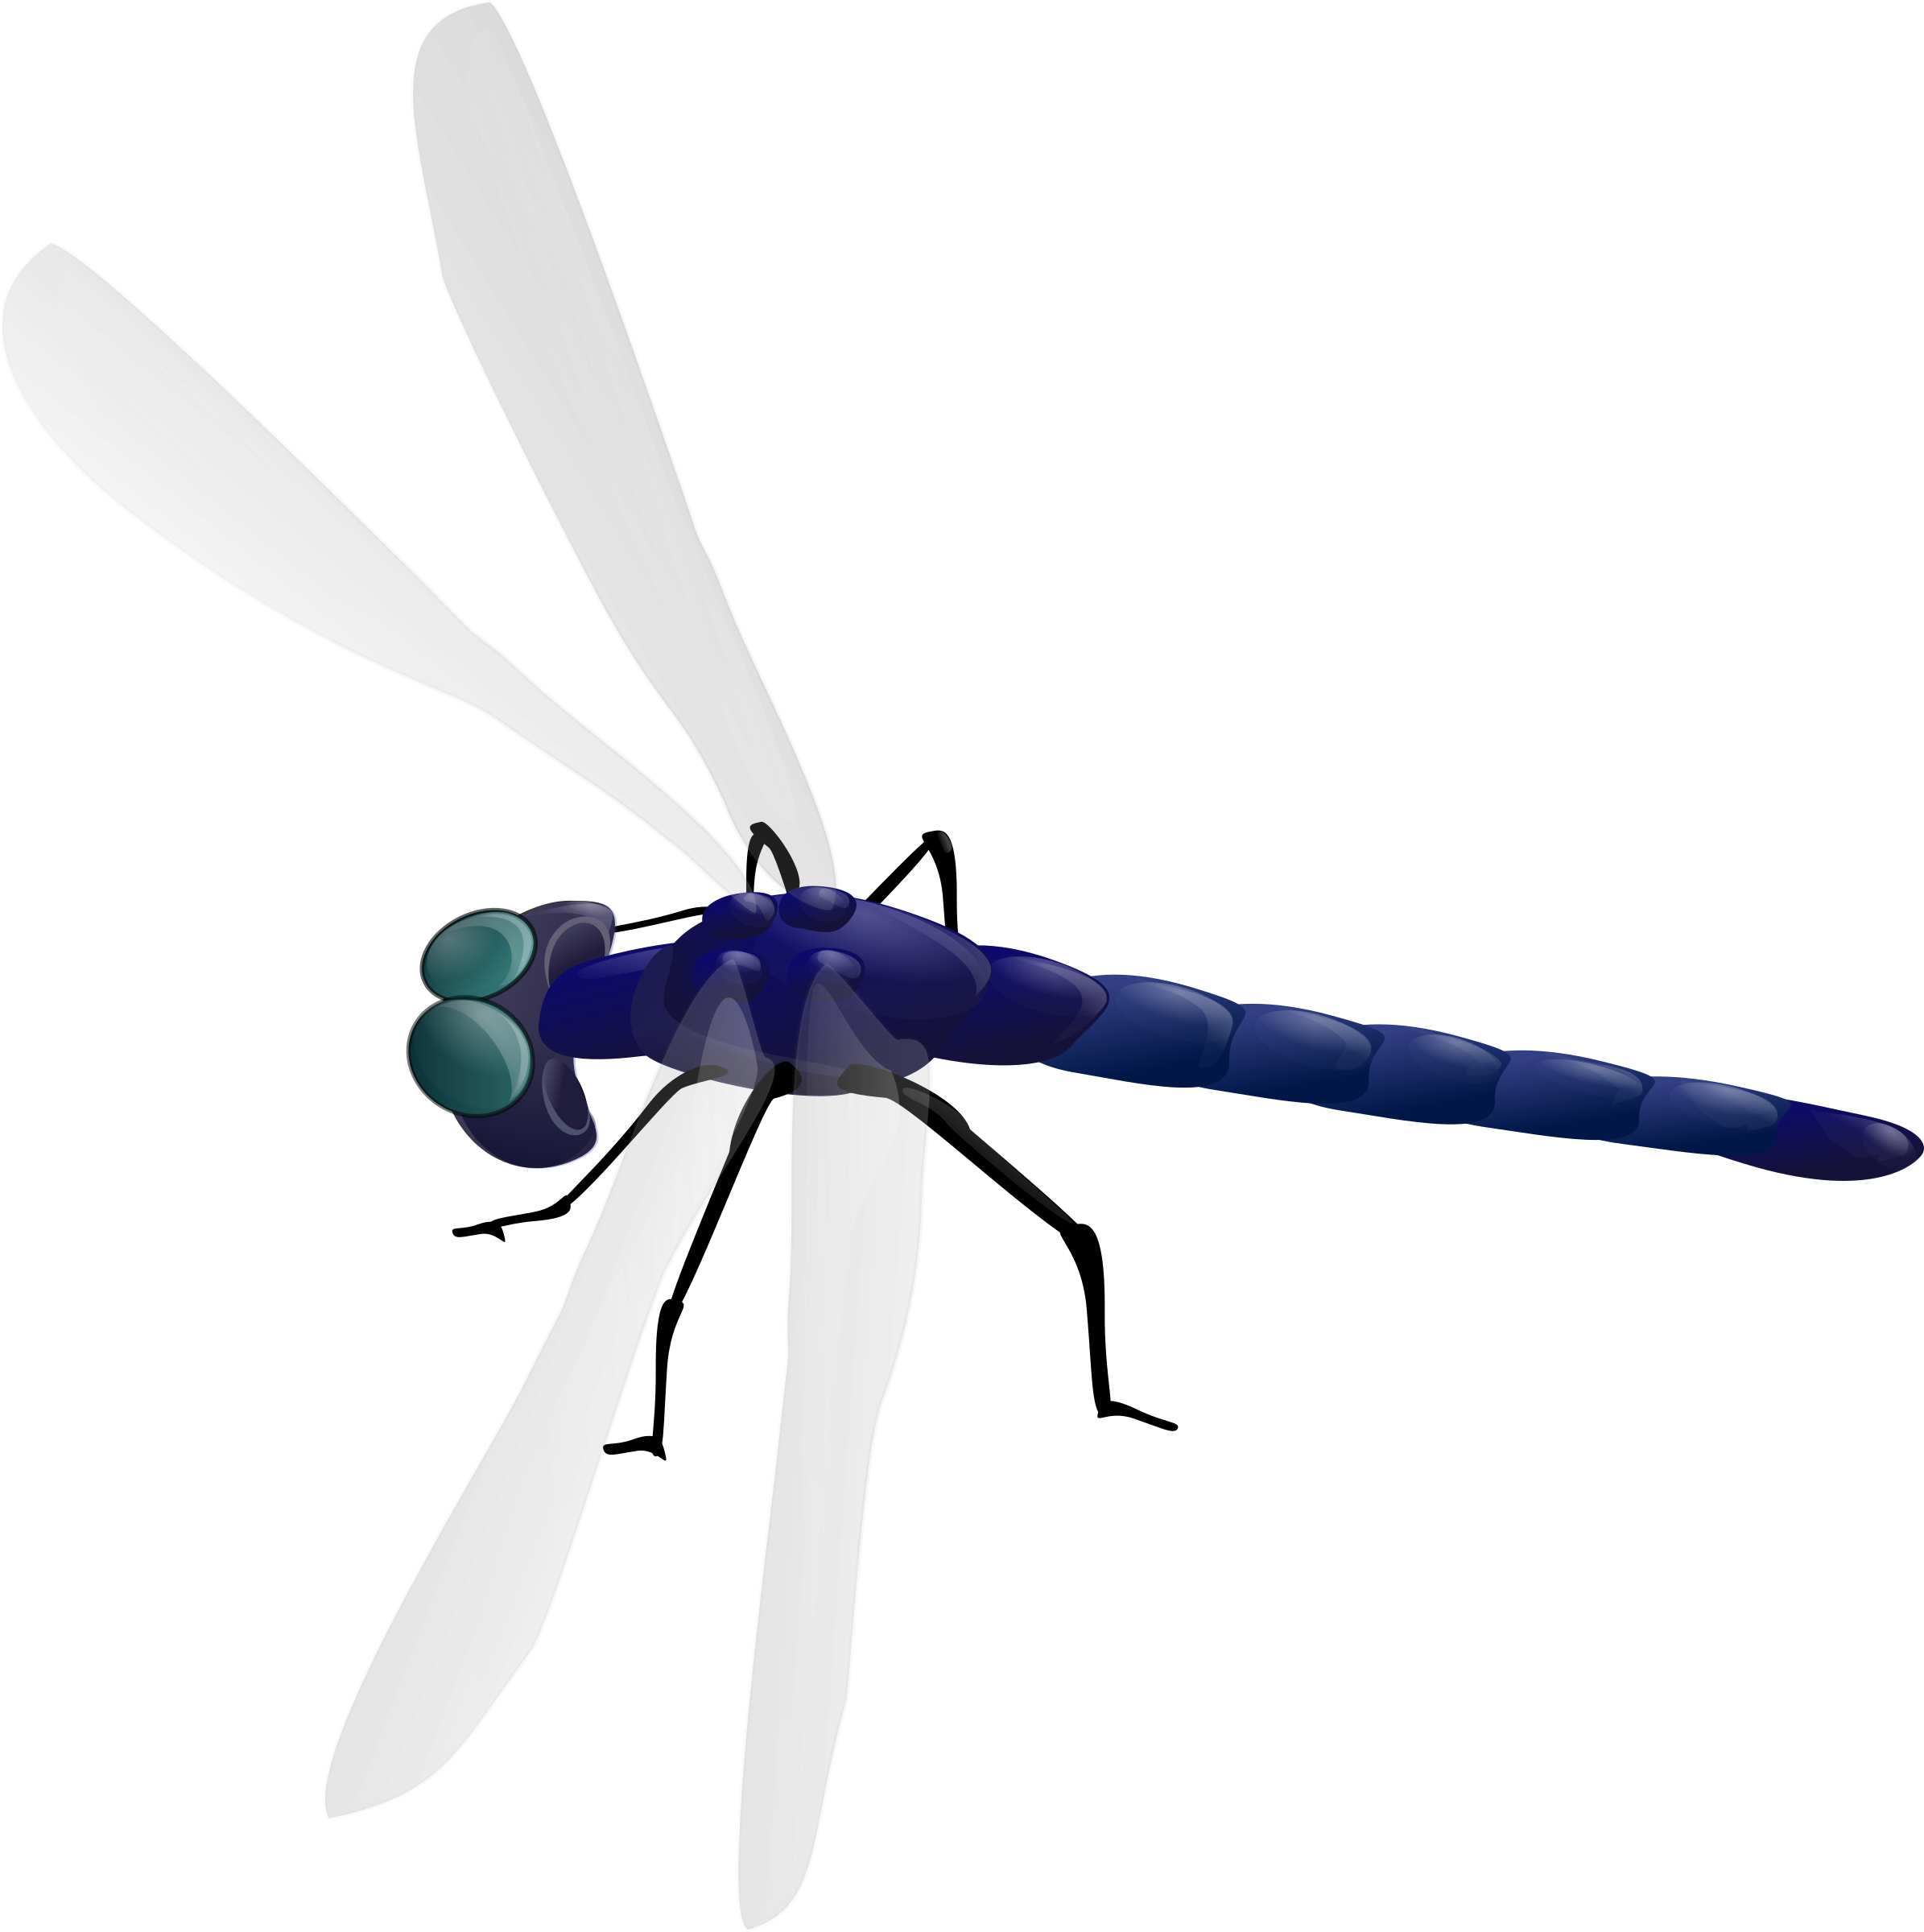 Icons png free and. Dragonfly clipart colorful dragonfly